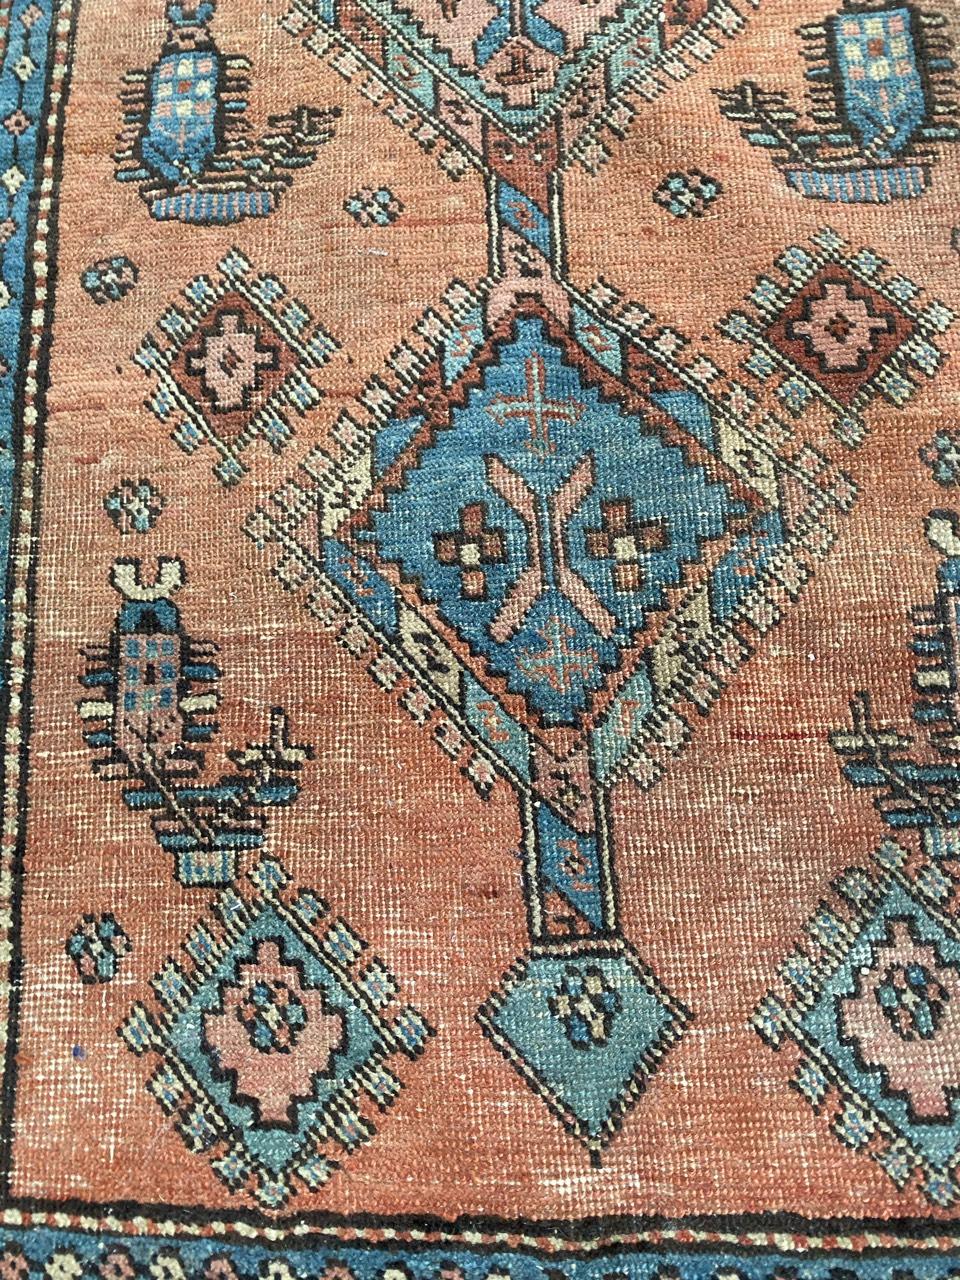 Very beautiful late 19th century rug with nice tribal design and beautiful natural colors with orange, blue, pink and green, entirely hand knotted with wool velvet on cotton foundation.

✨✨✨
